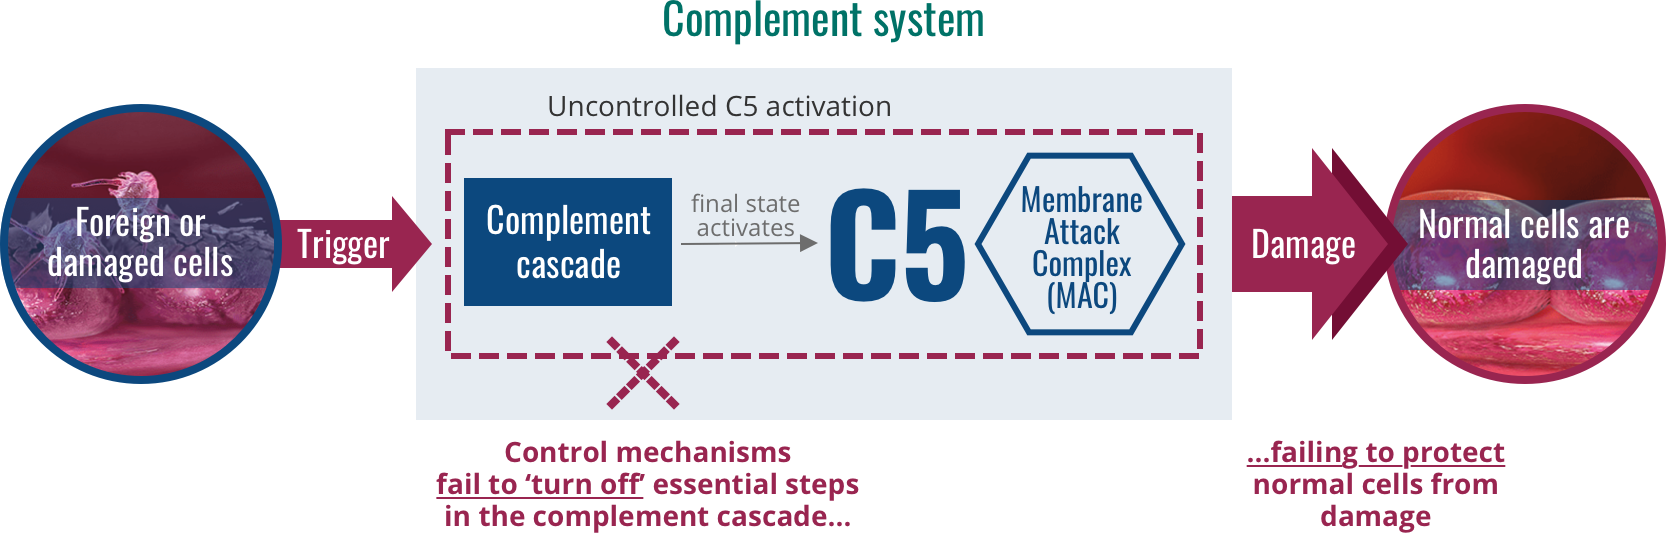 Abnormally functioning complement system